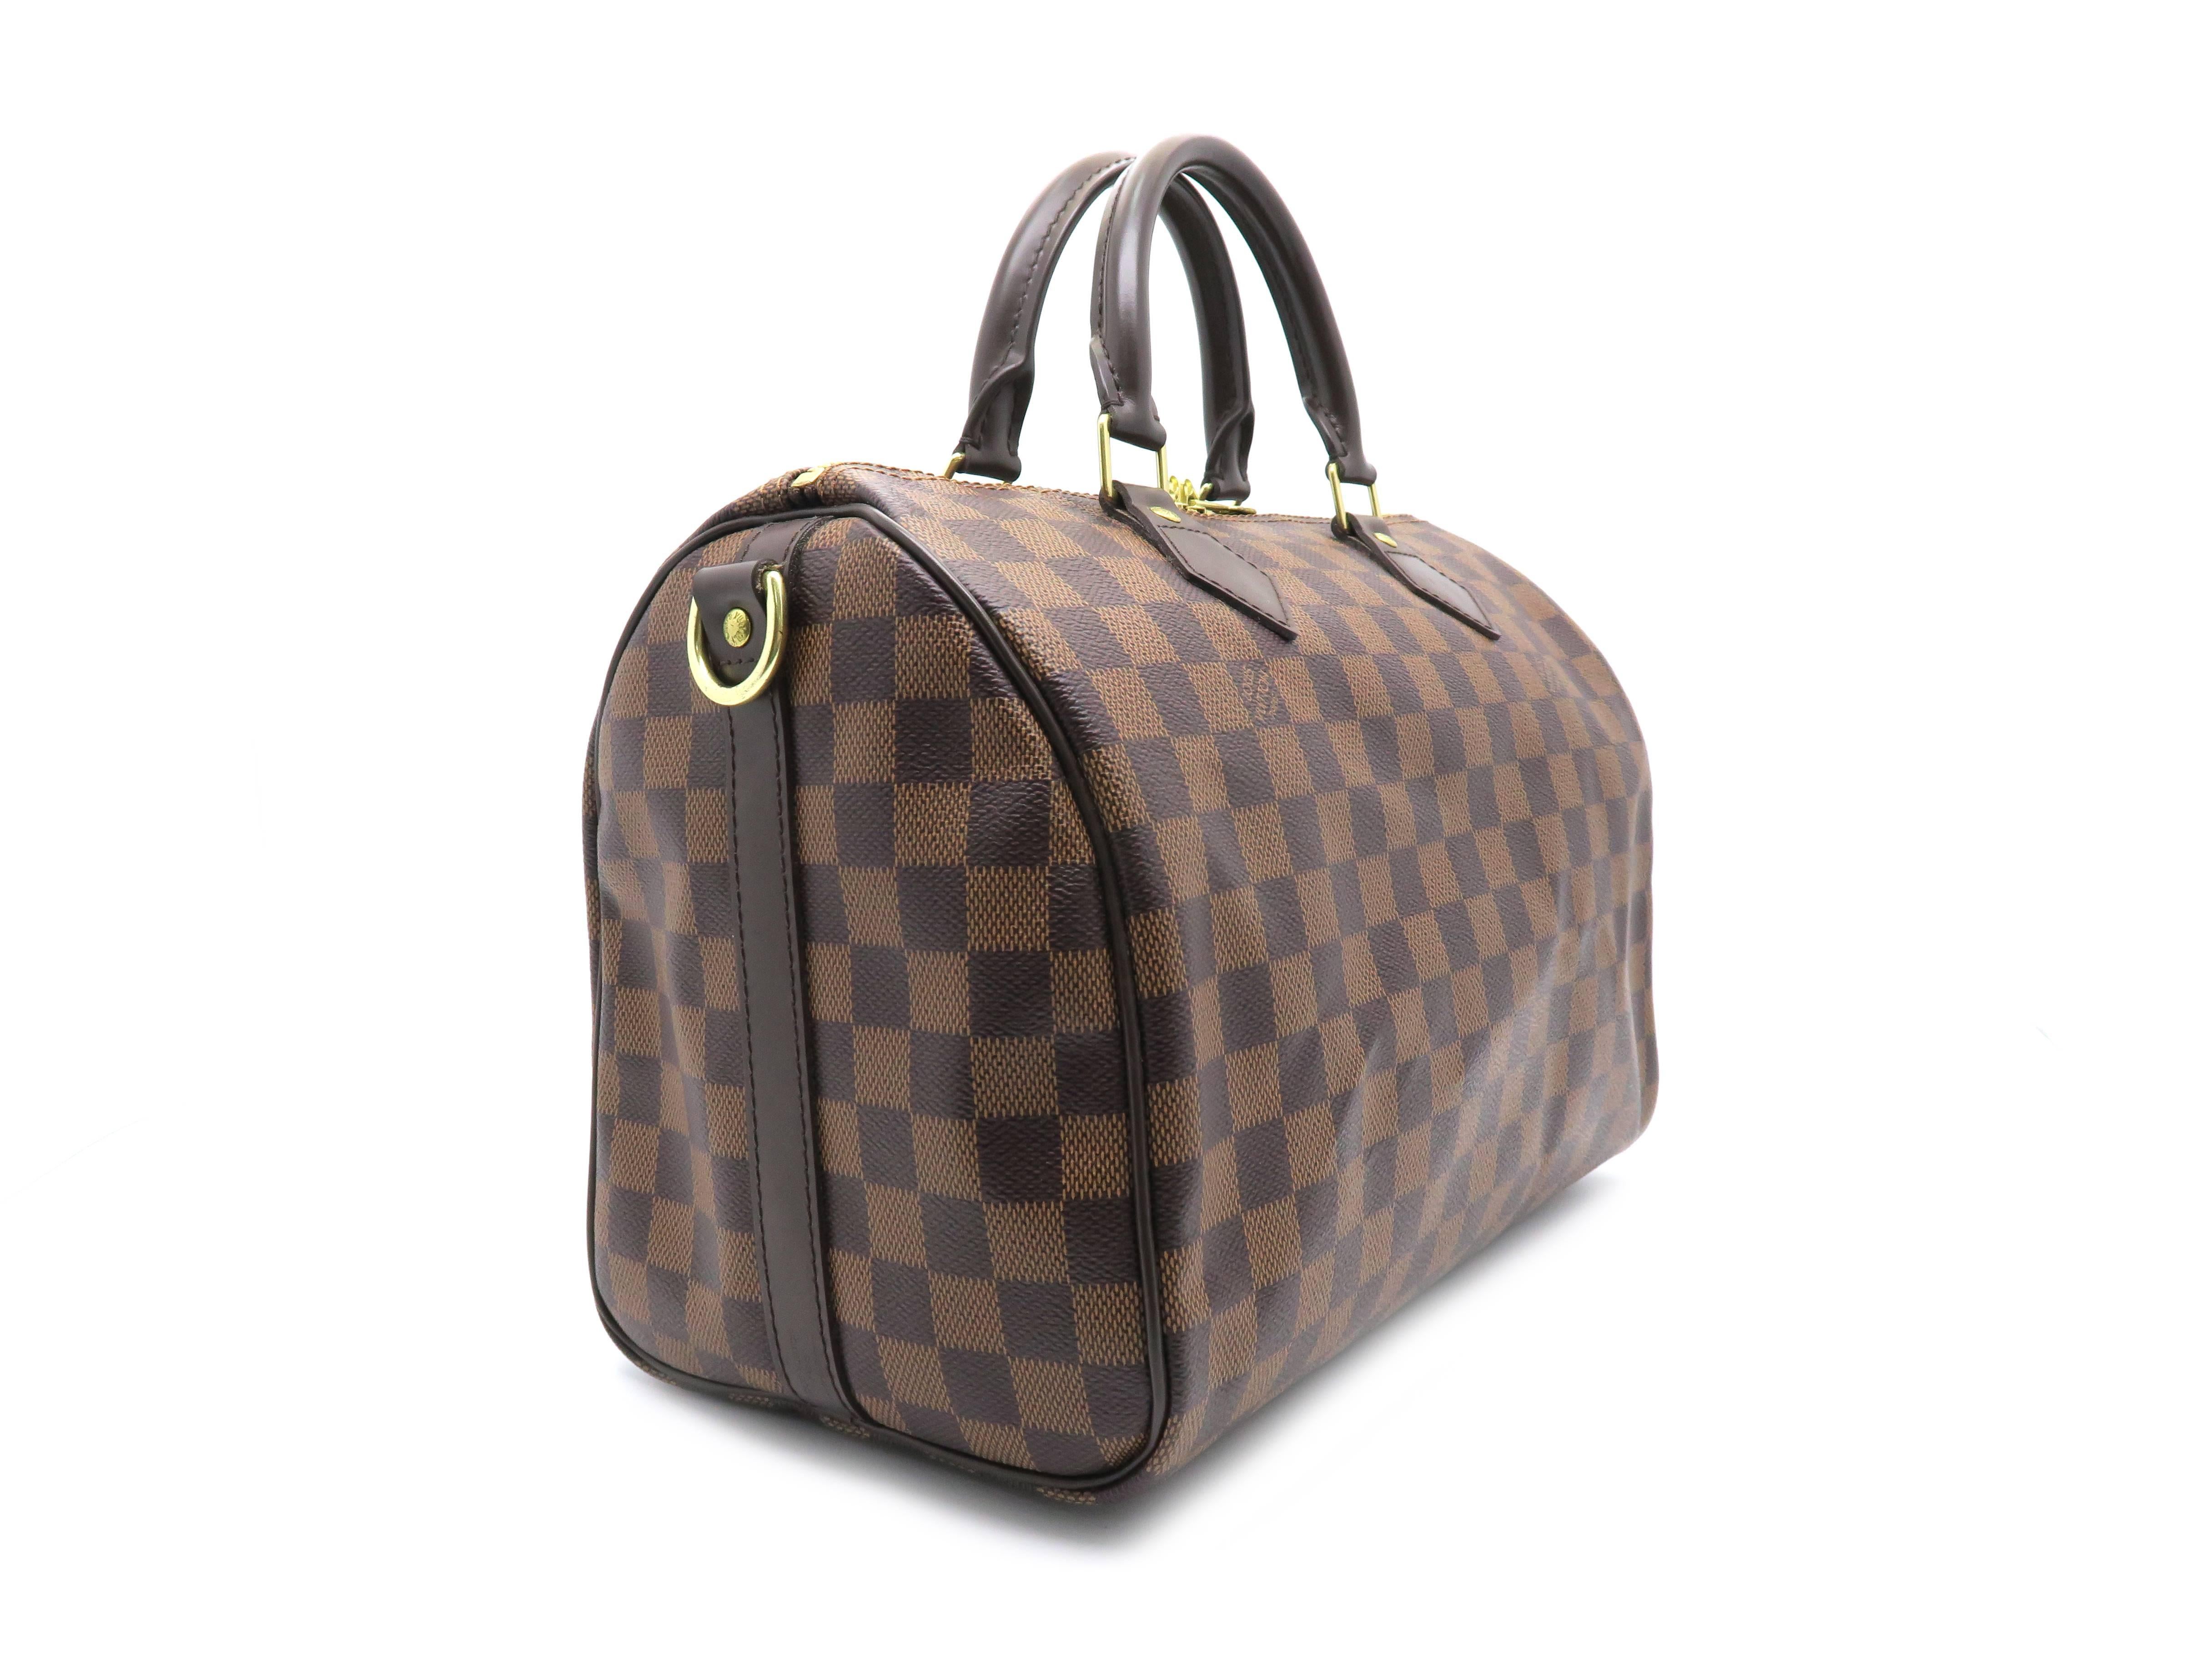 Color: Brown

Material: Damier

Condition: Rank S 
Overall: Almost New
Surface: Good
Corners: Good
Edges: Good
Handles/Straps: Good
Hardware: Good

Dimension: W30 × H21 × D17cm（W11.8" × H8.2" × D6.6"）
Handle:25cm（9.8"）
Shoulder